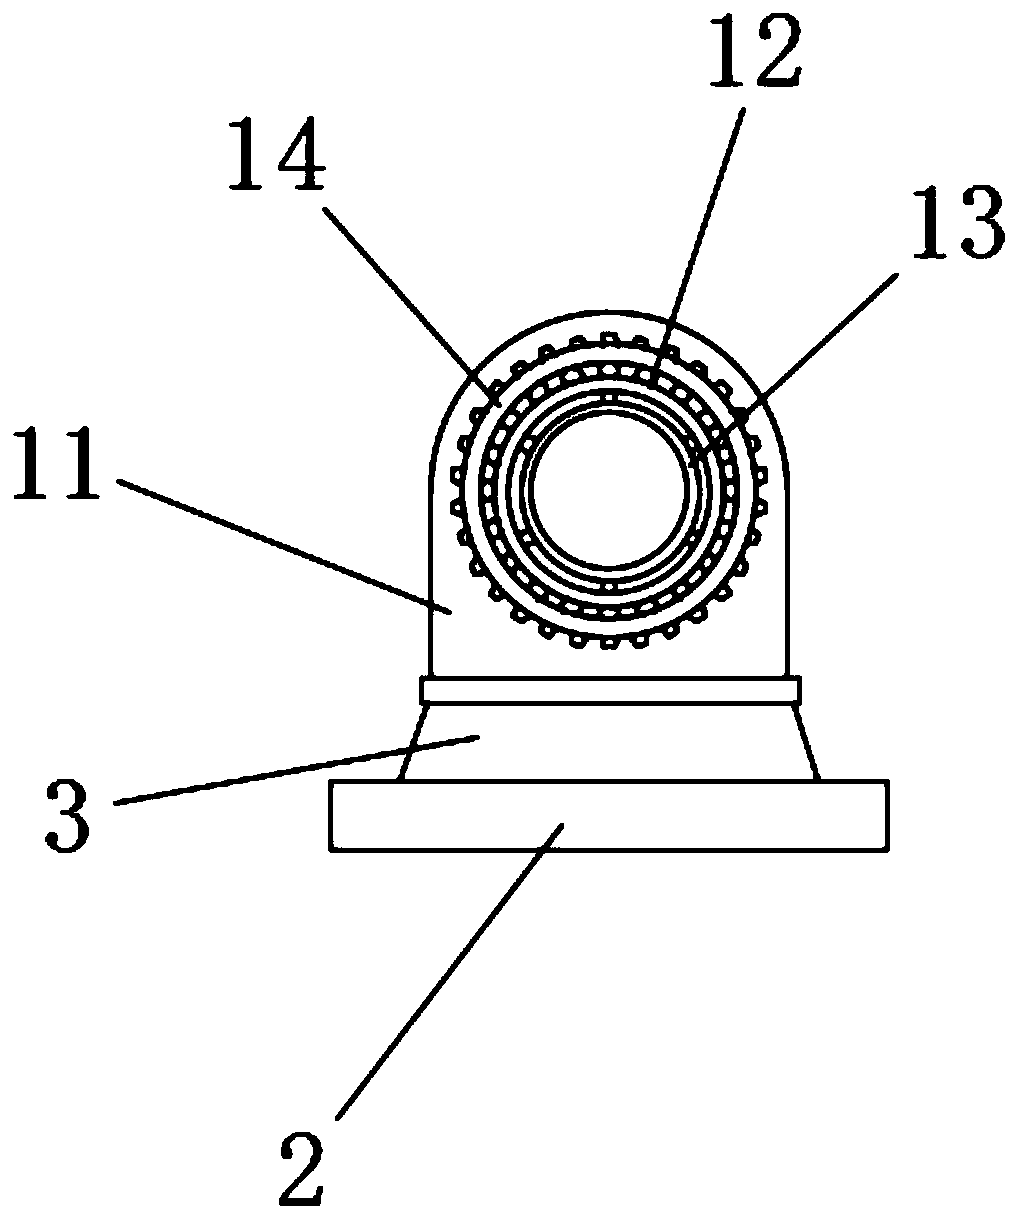 A thermos bottle liner conveying and dumping device